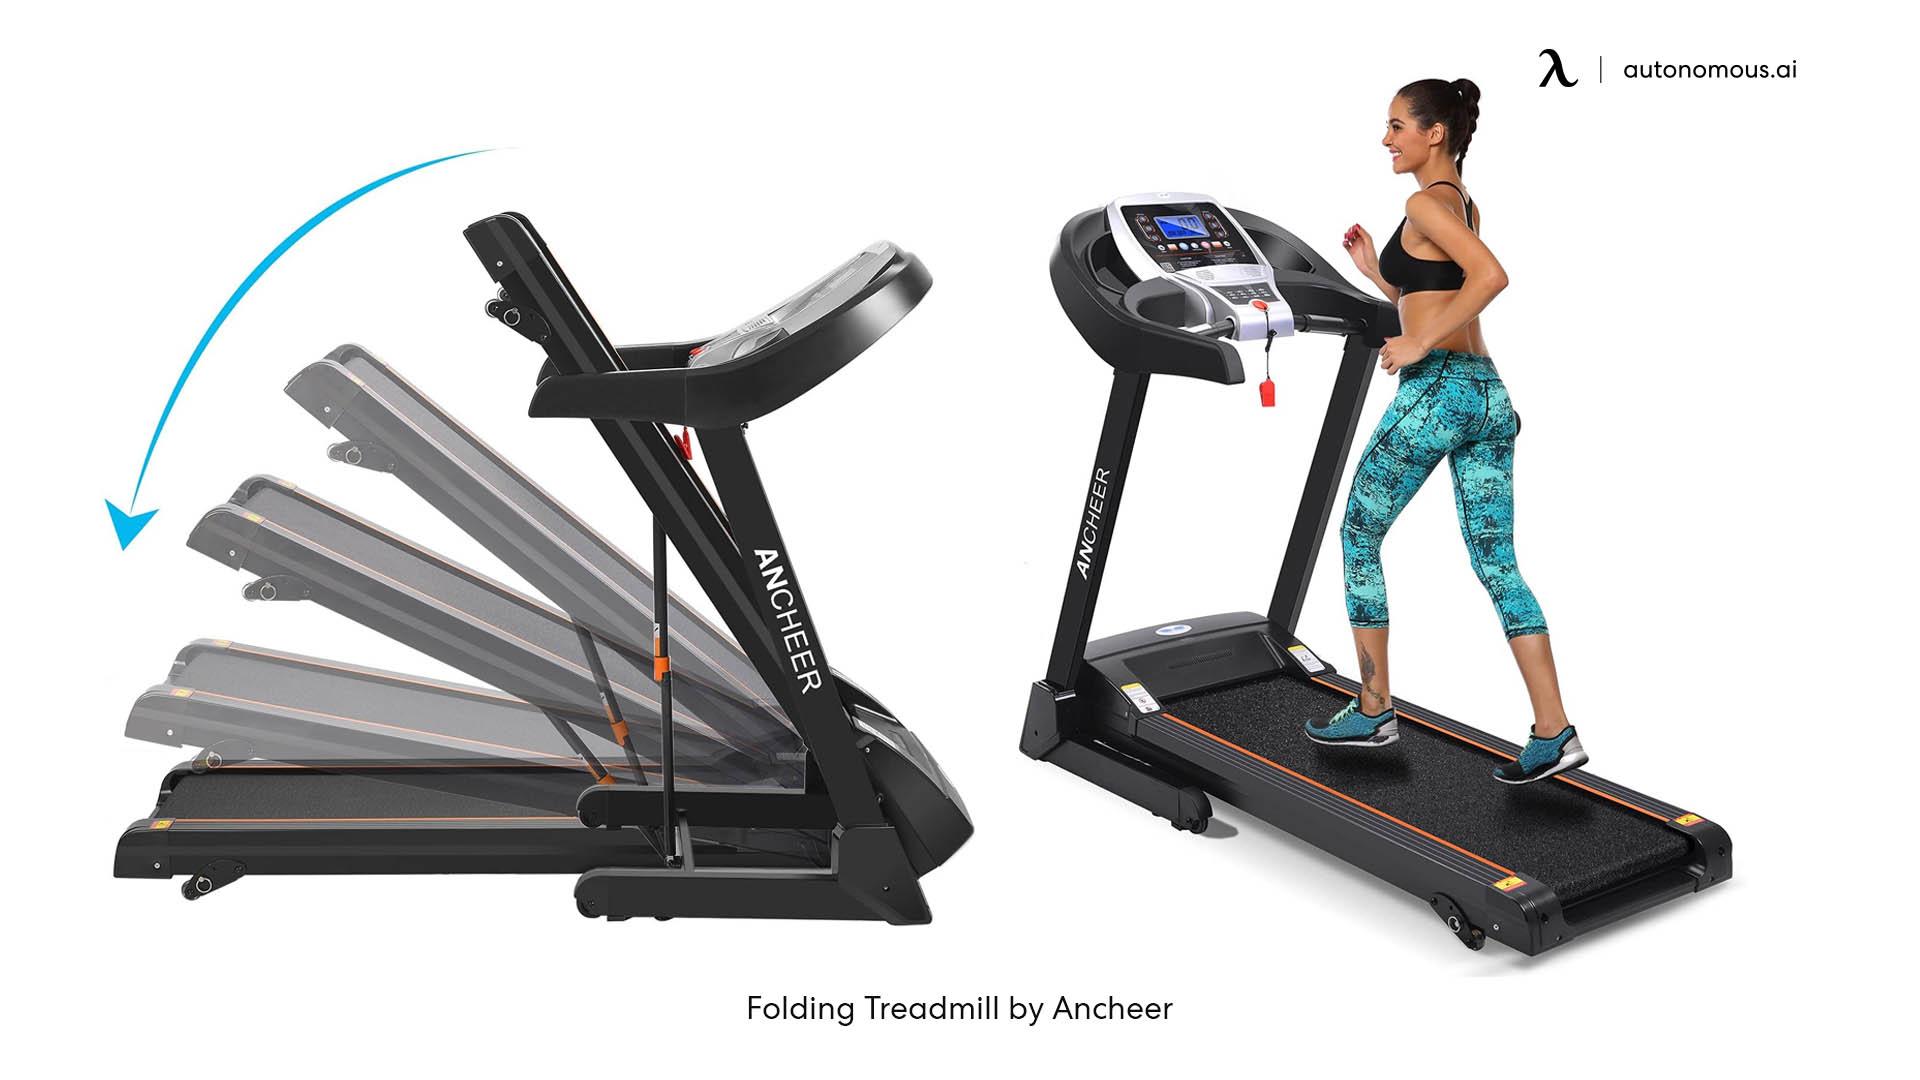 Folding Treadmill by Ancheer